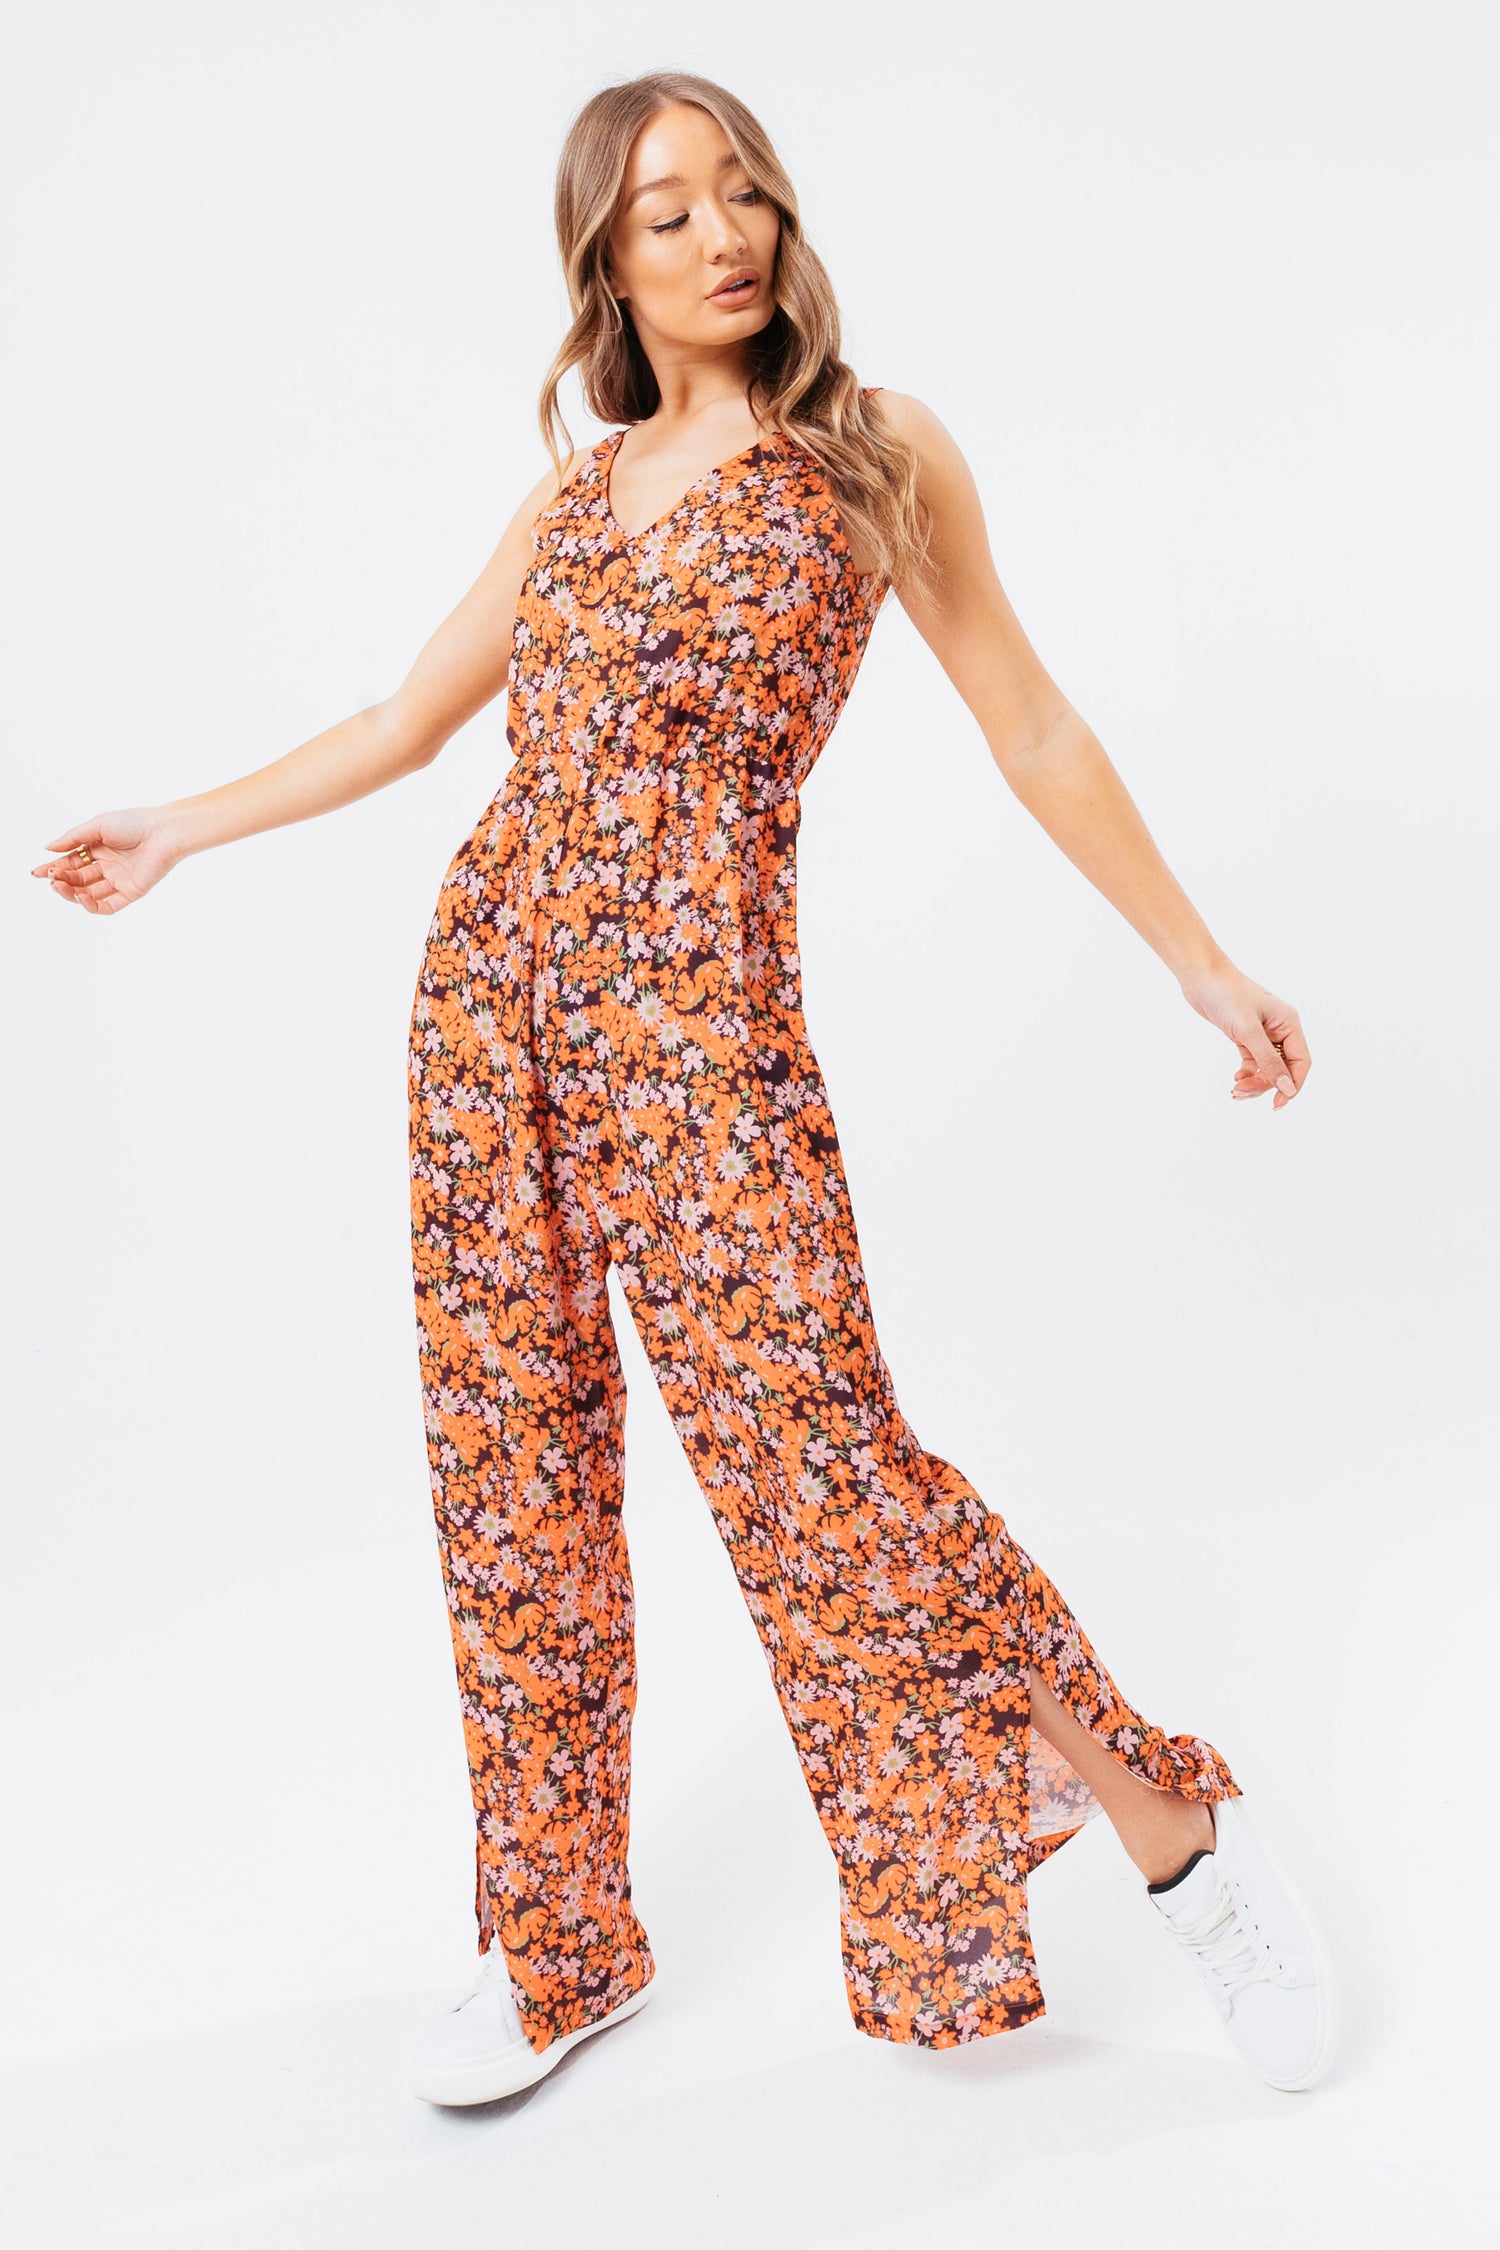 Sunward Floral Jumpsuit | 10 Comfortable Jumpsuits You'll Want to Live In —  All From Amazon and Under $15 | POPSUGAR Fashion UK Photo 11